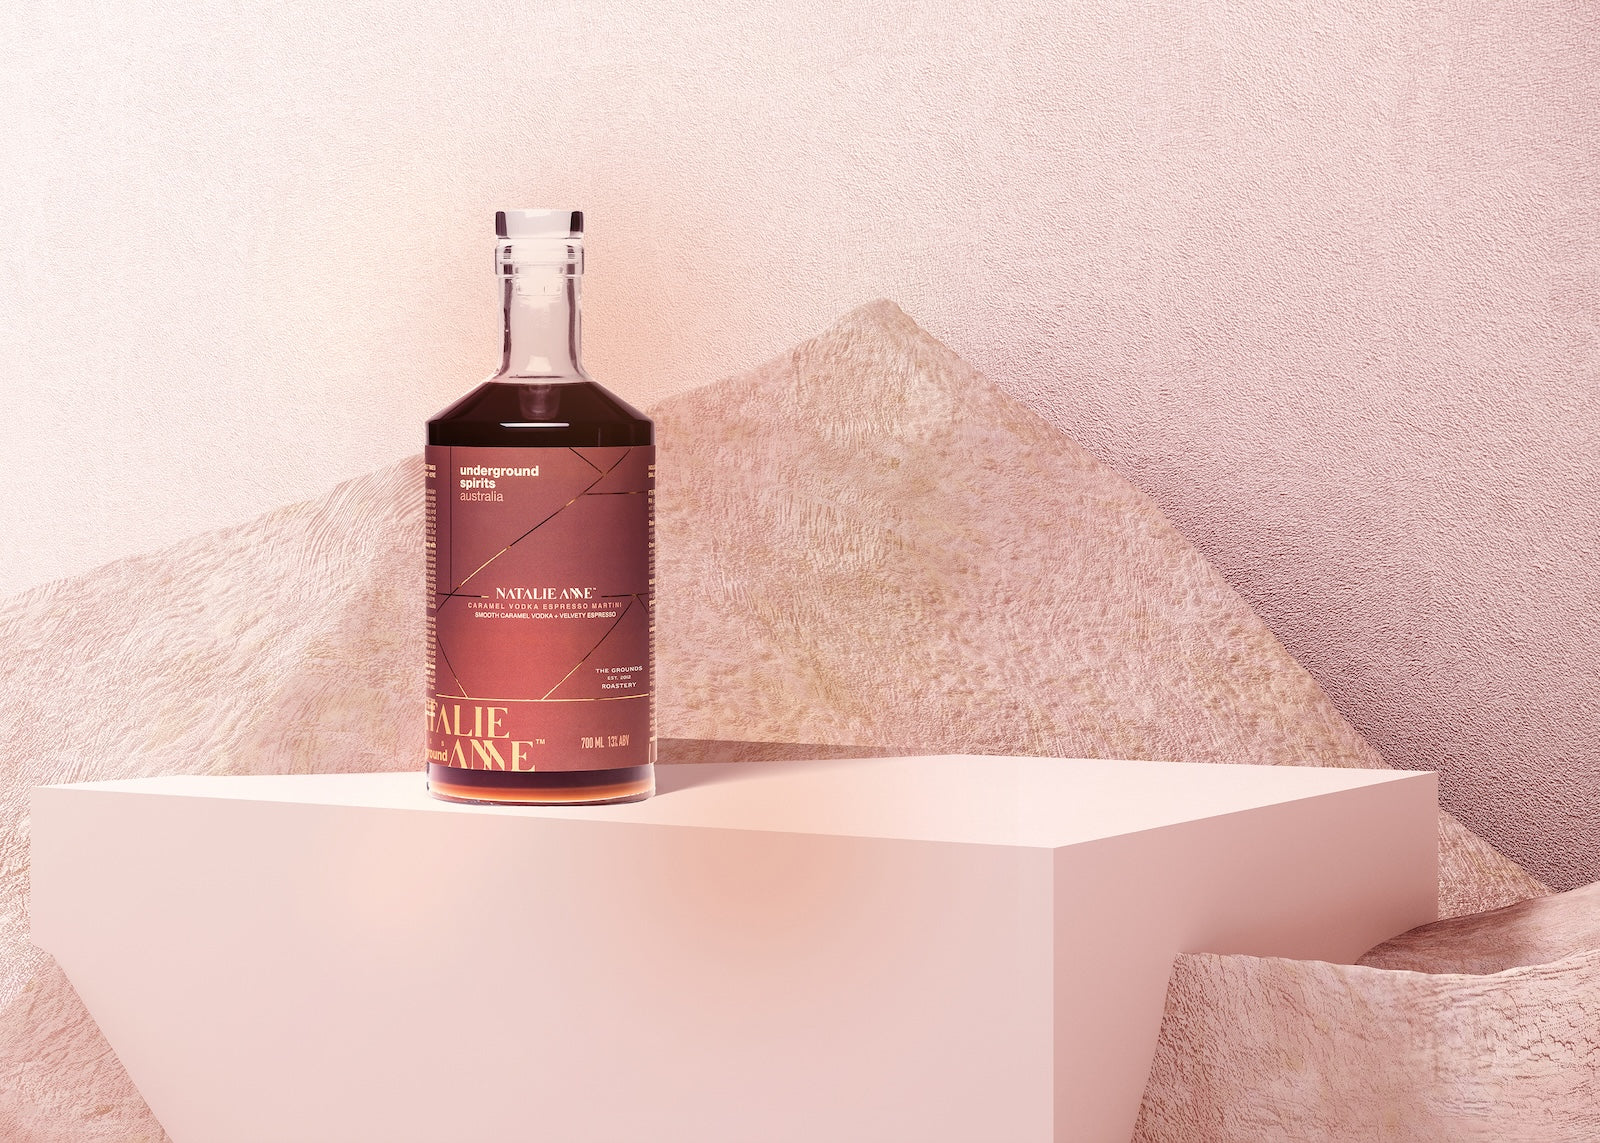 Underground Spirits Australia x Natalie Anne Limited Edition Caramel Espresso Martini sits elegantly on a minimalist pedestal, surrounded by abstract textures and pink lighting